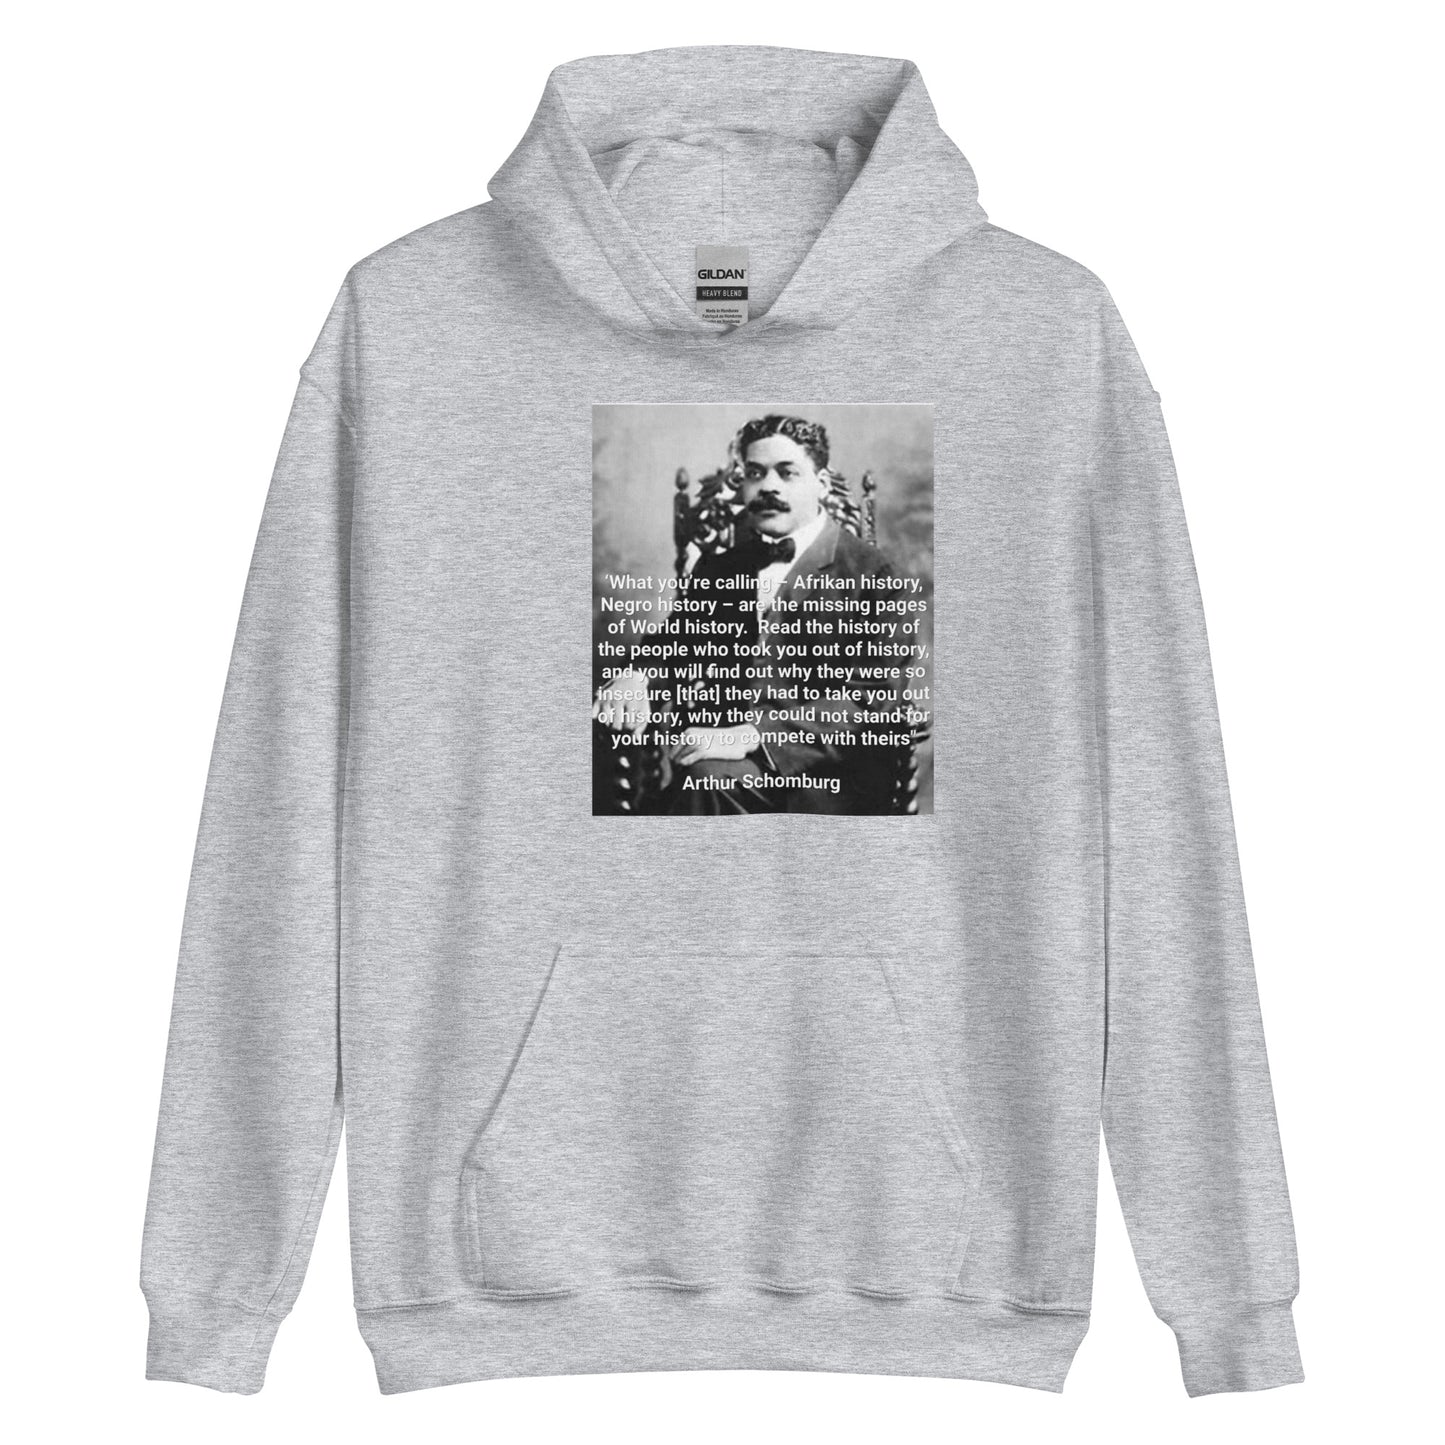 Arthur Schomburg African history missing pages of World history Unisex Hoodie